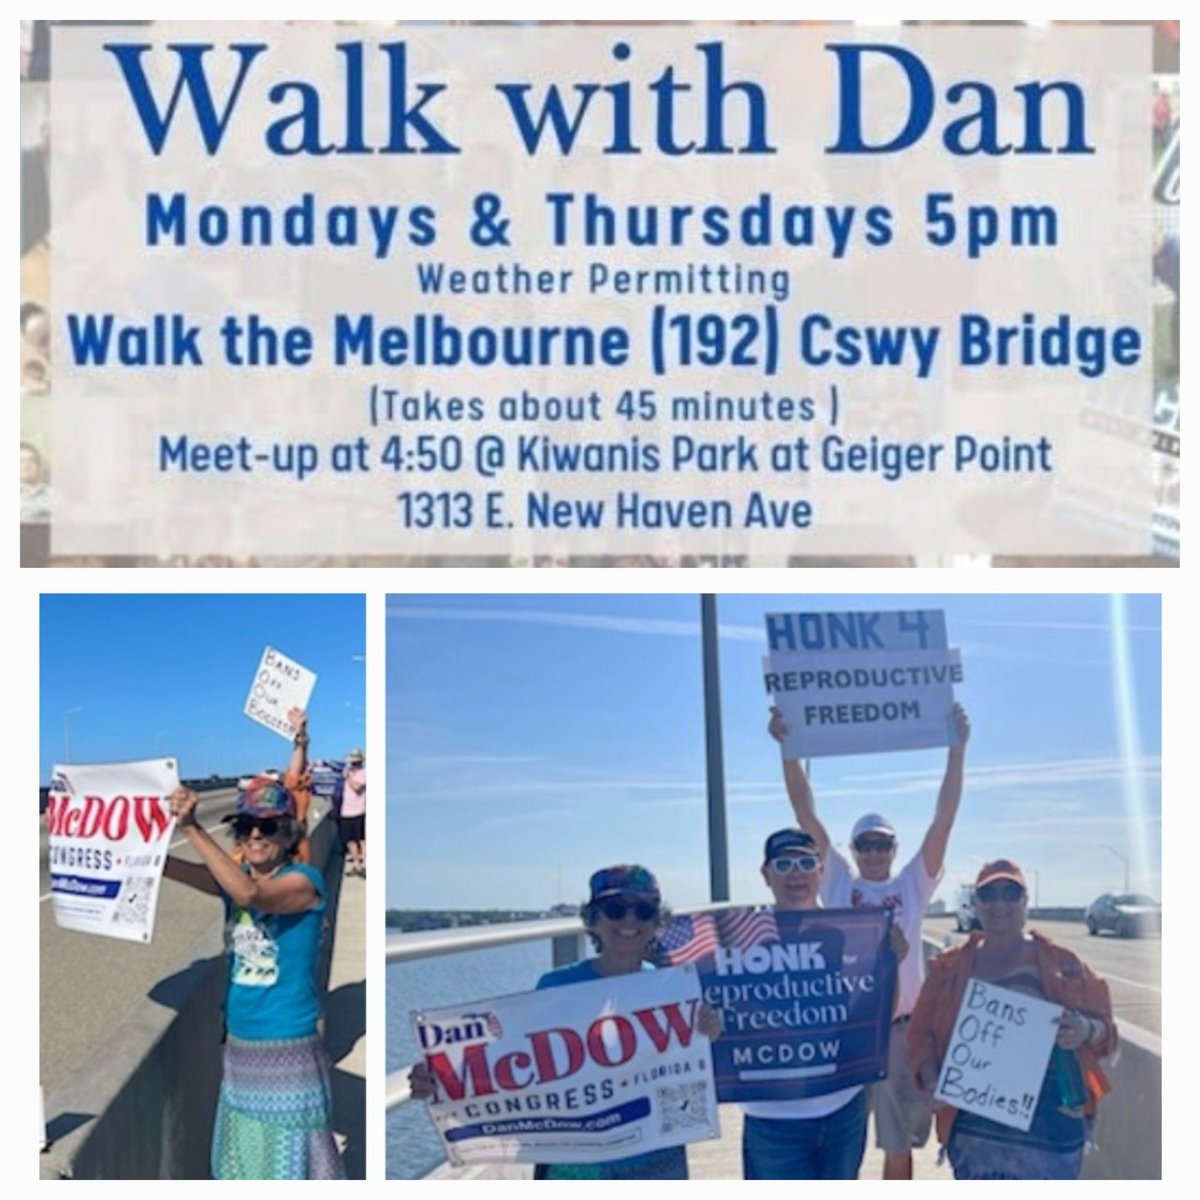 It's #WalkWithDan day!

Get your steps in while you show Brevard your support for #McDow4Congress & #ReproductiveFreedom